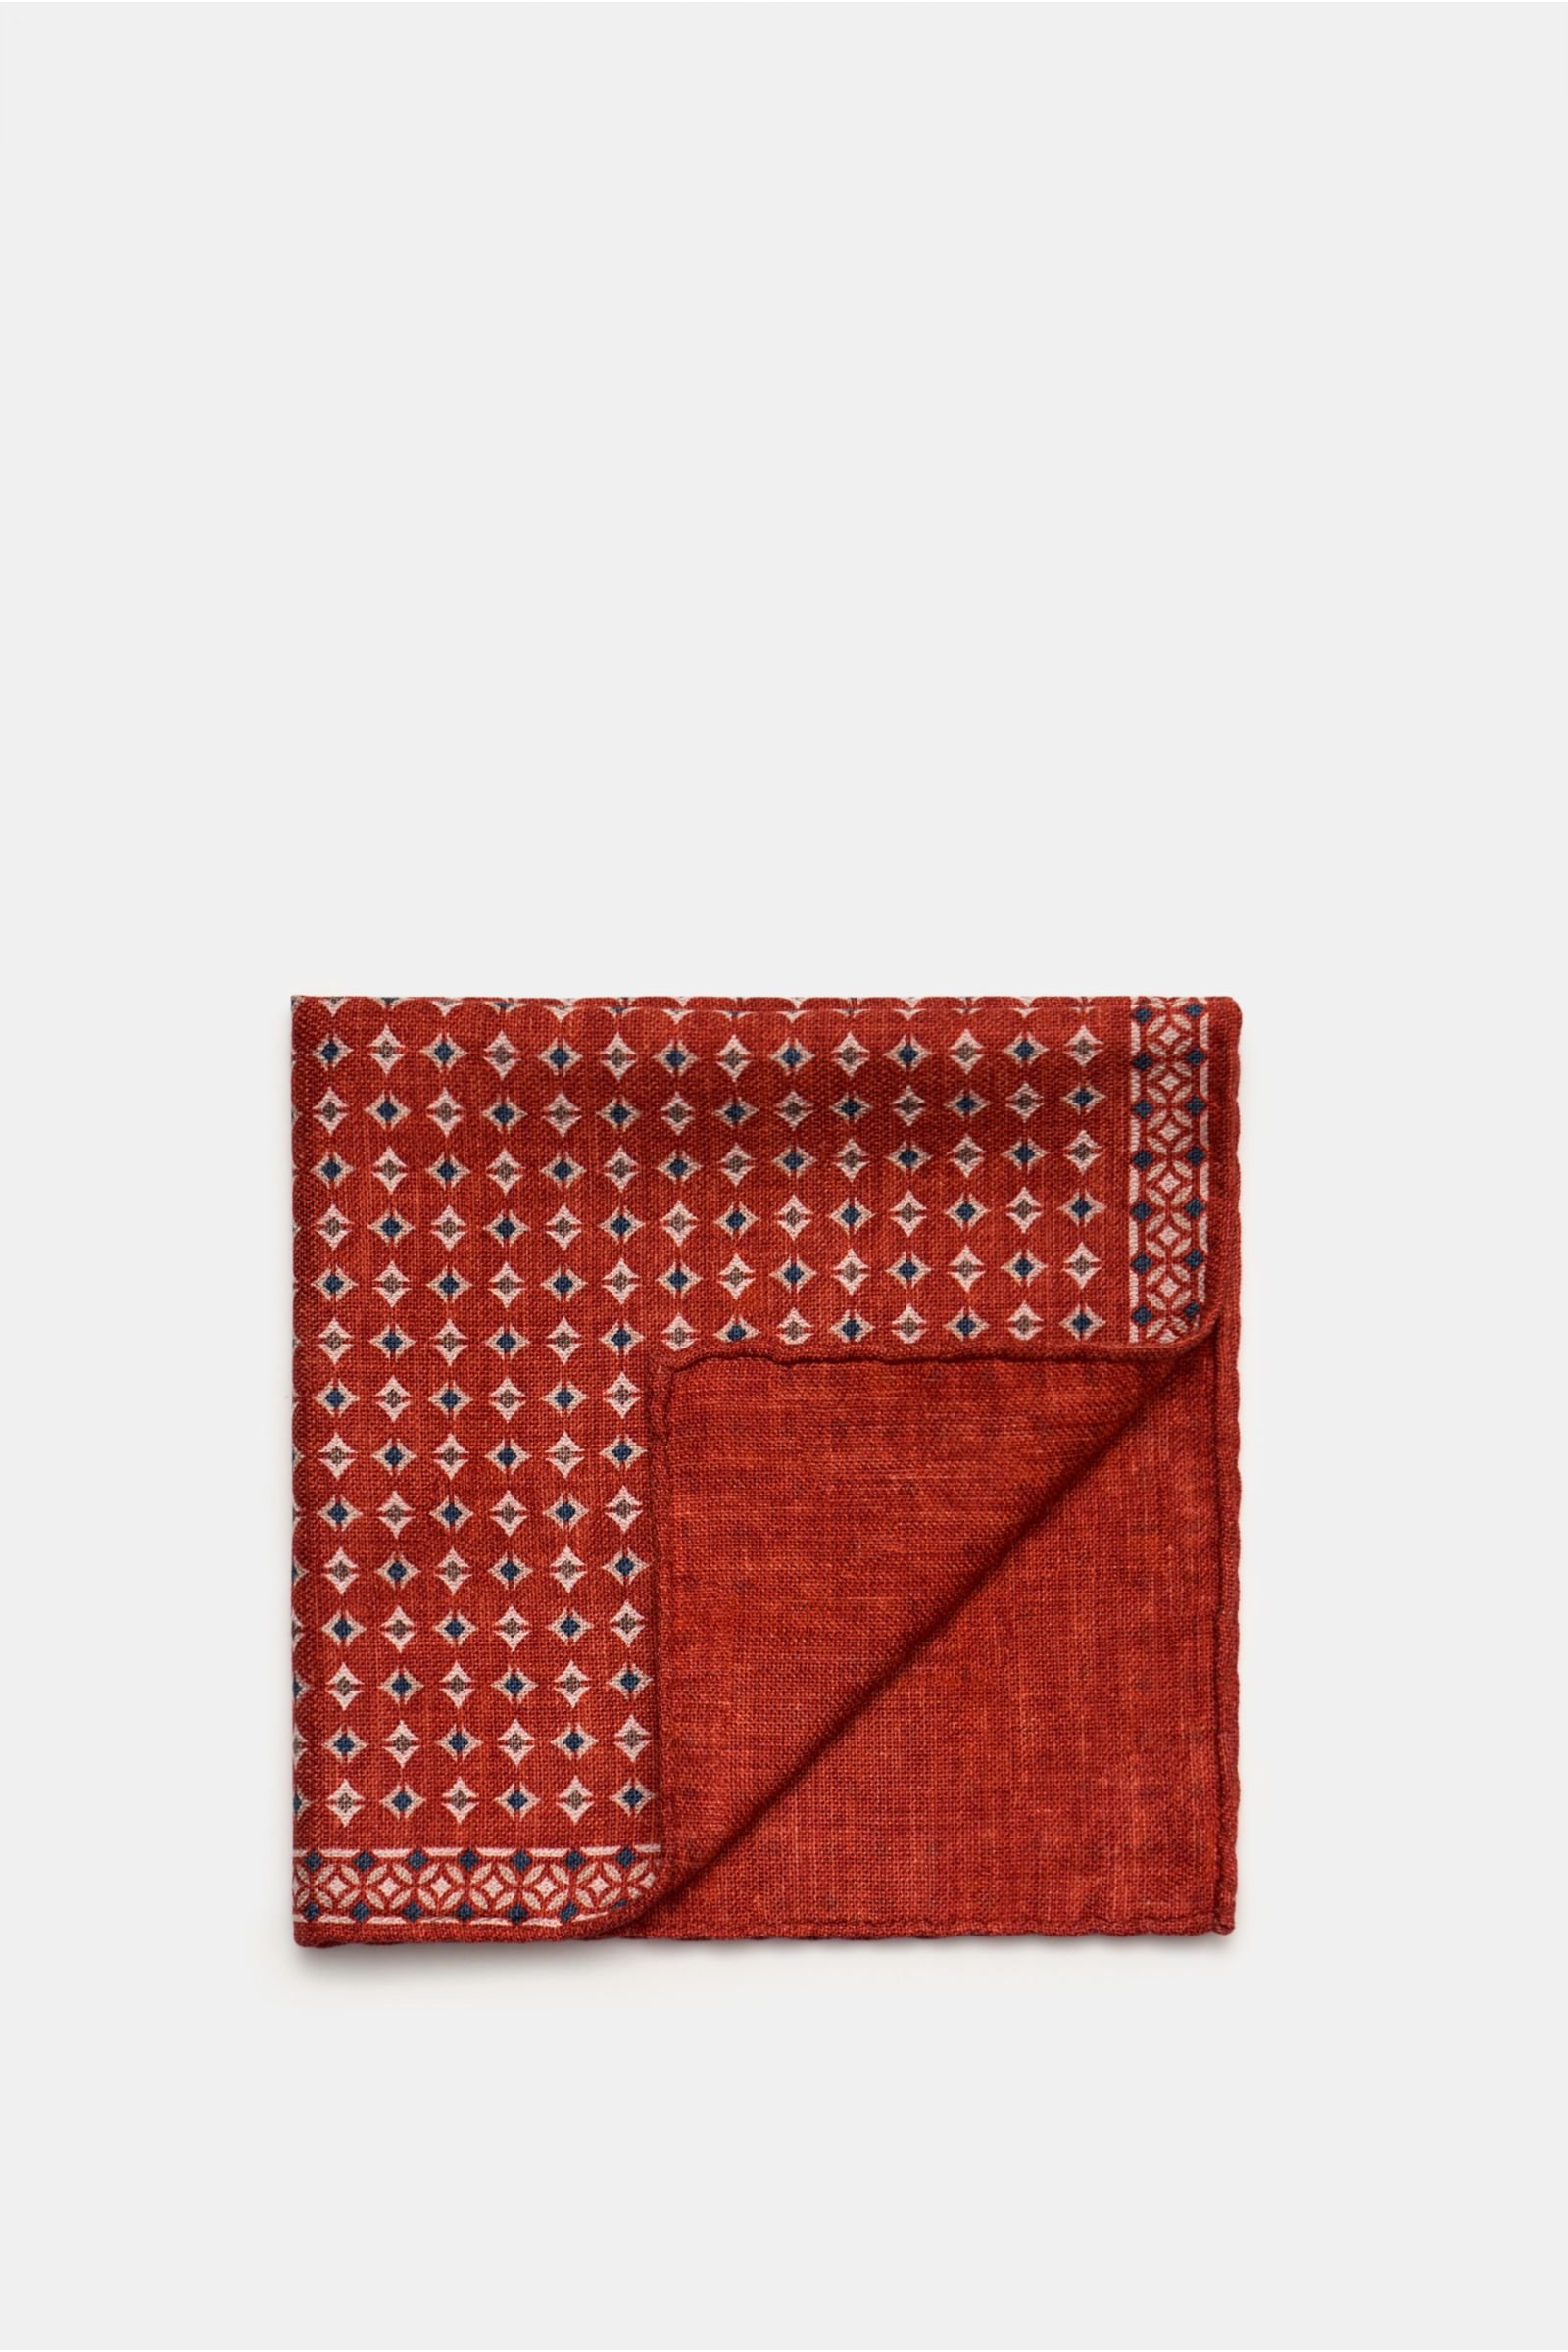 Pocket square rust-red/grey-blue patterned